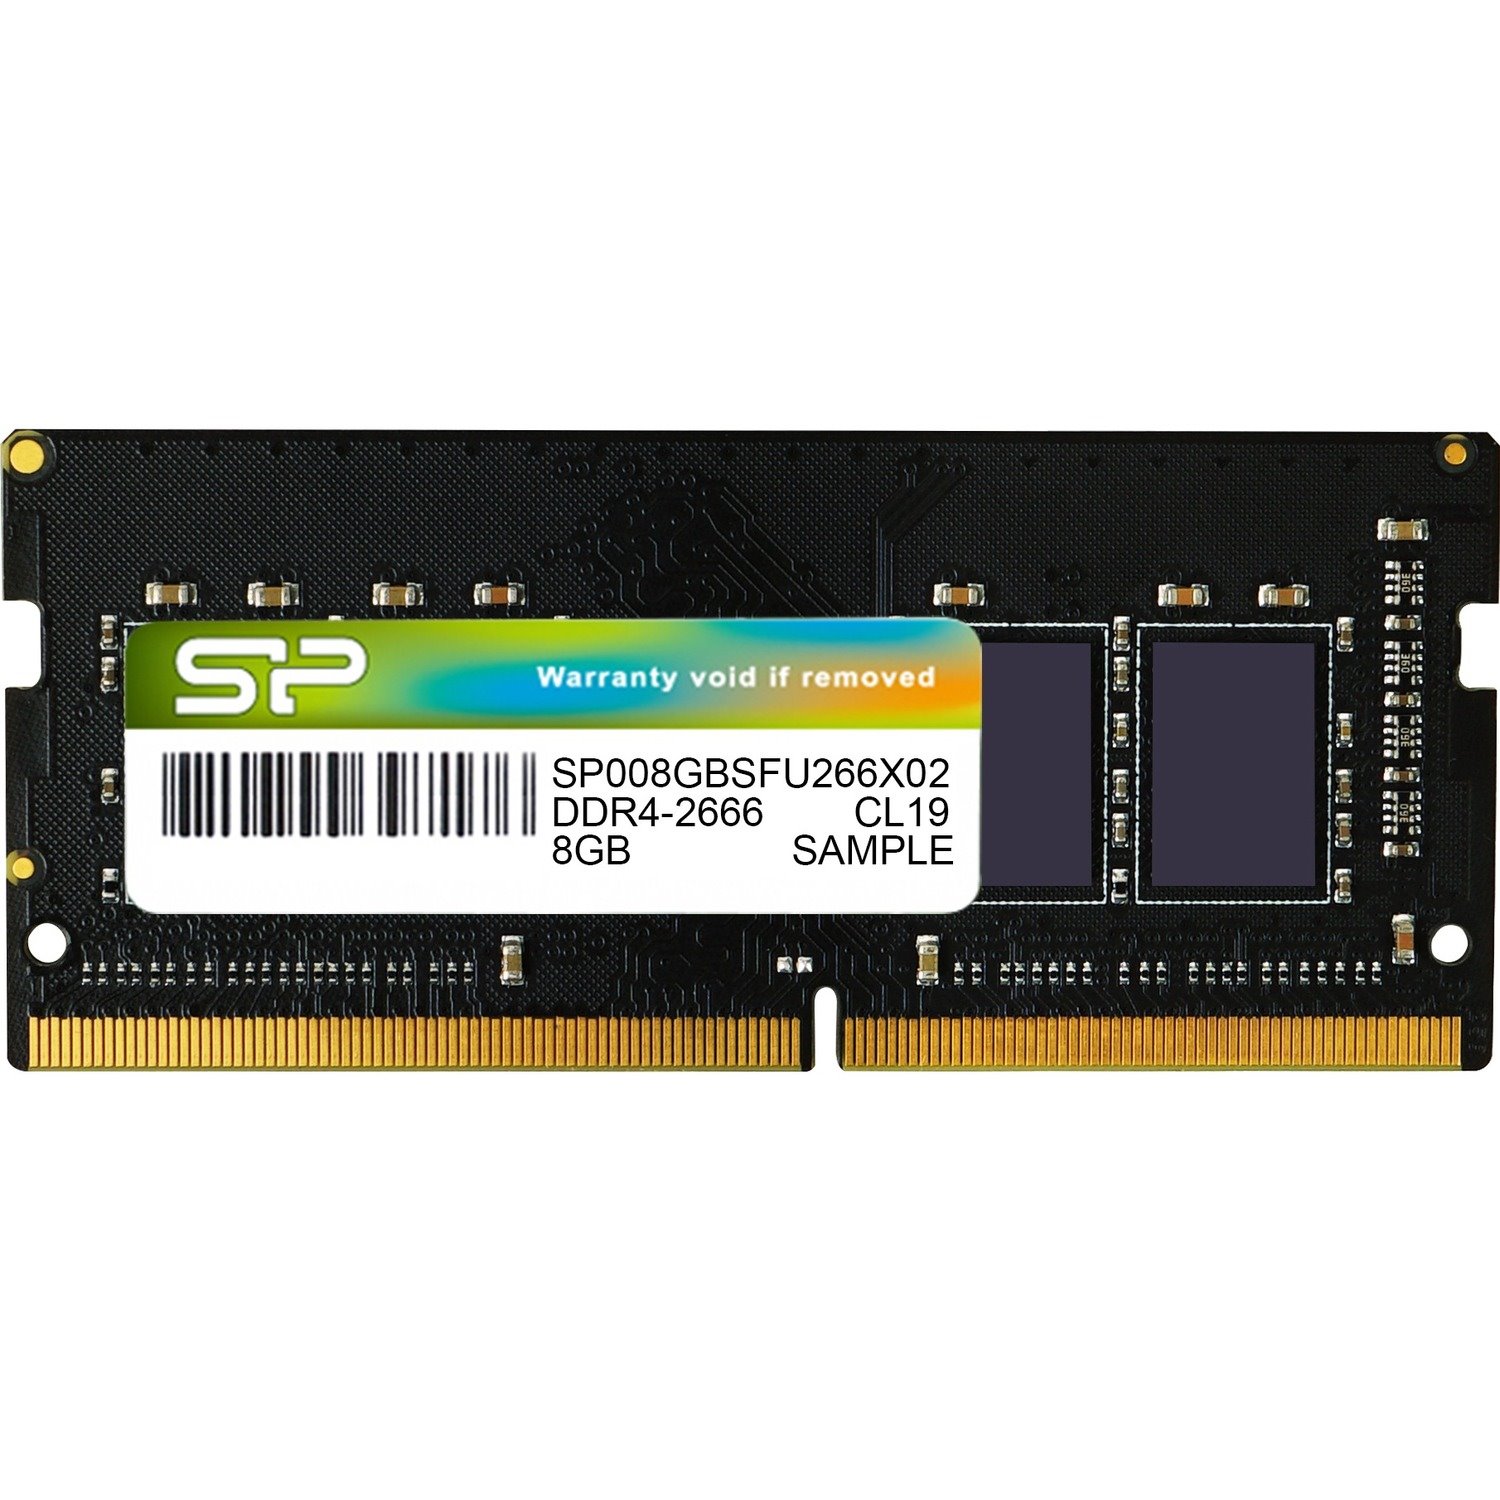 Silicon Power RAM Module for Motherboard, Notebook - 8 GB - DDR4-2666/PC4-21333 DDR4 SDRAM - 2666 MHz - CL19 - 1.20 V